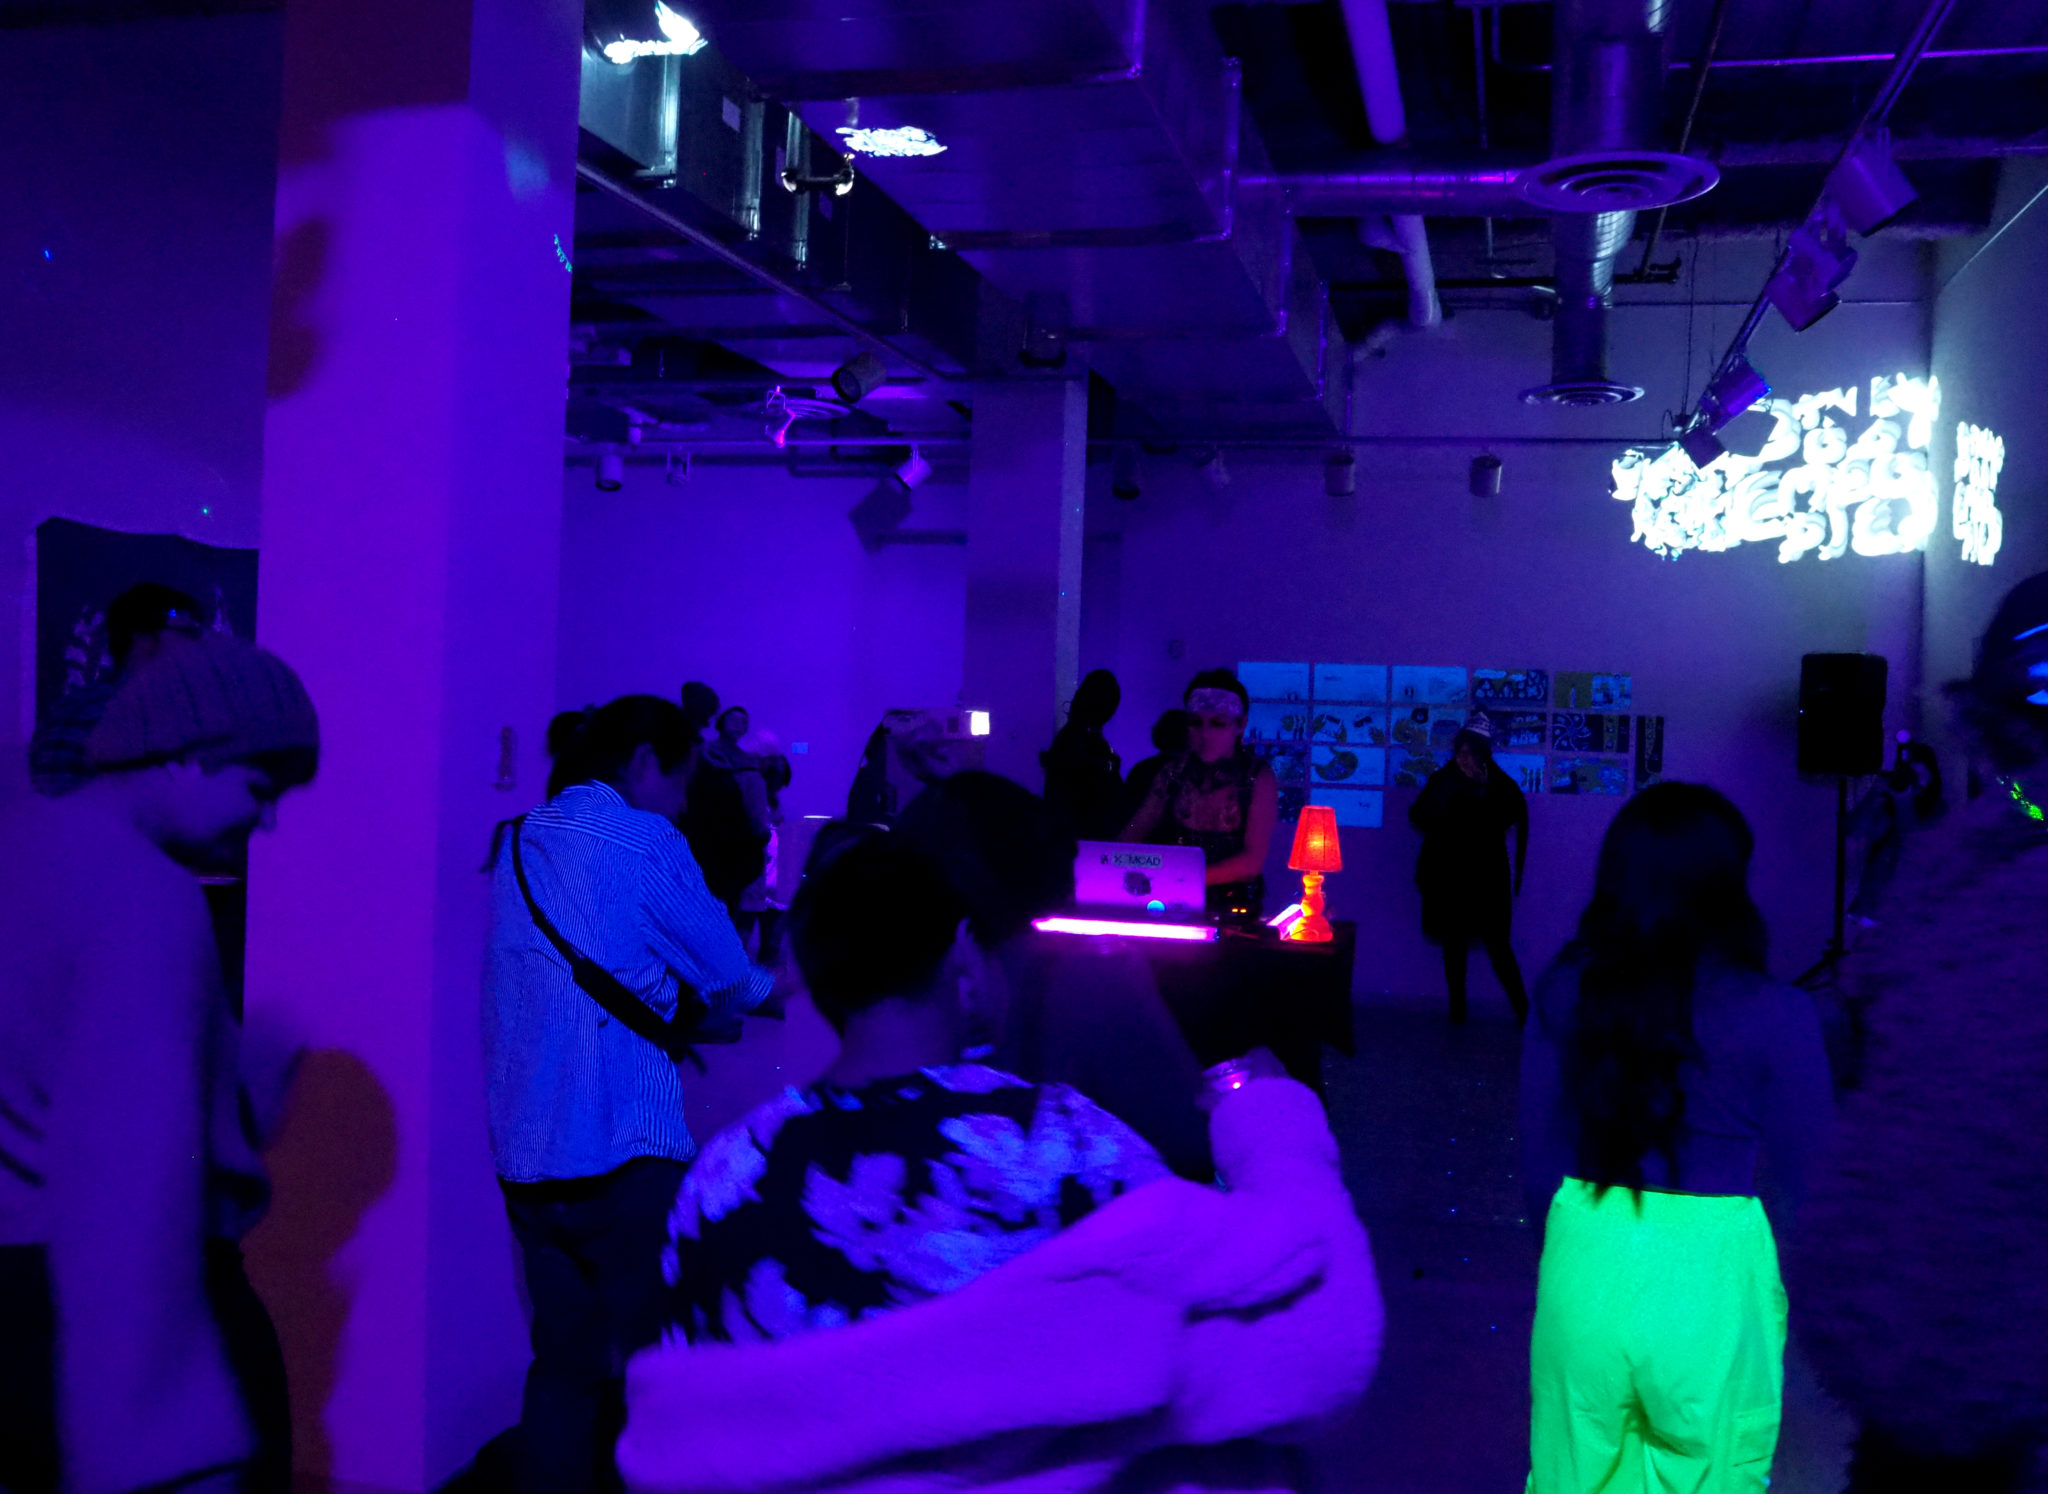 The rave party in the exhibition space